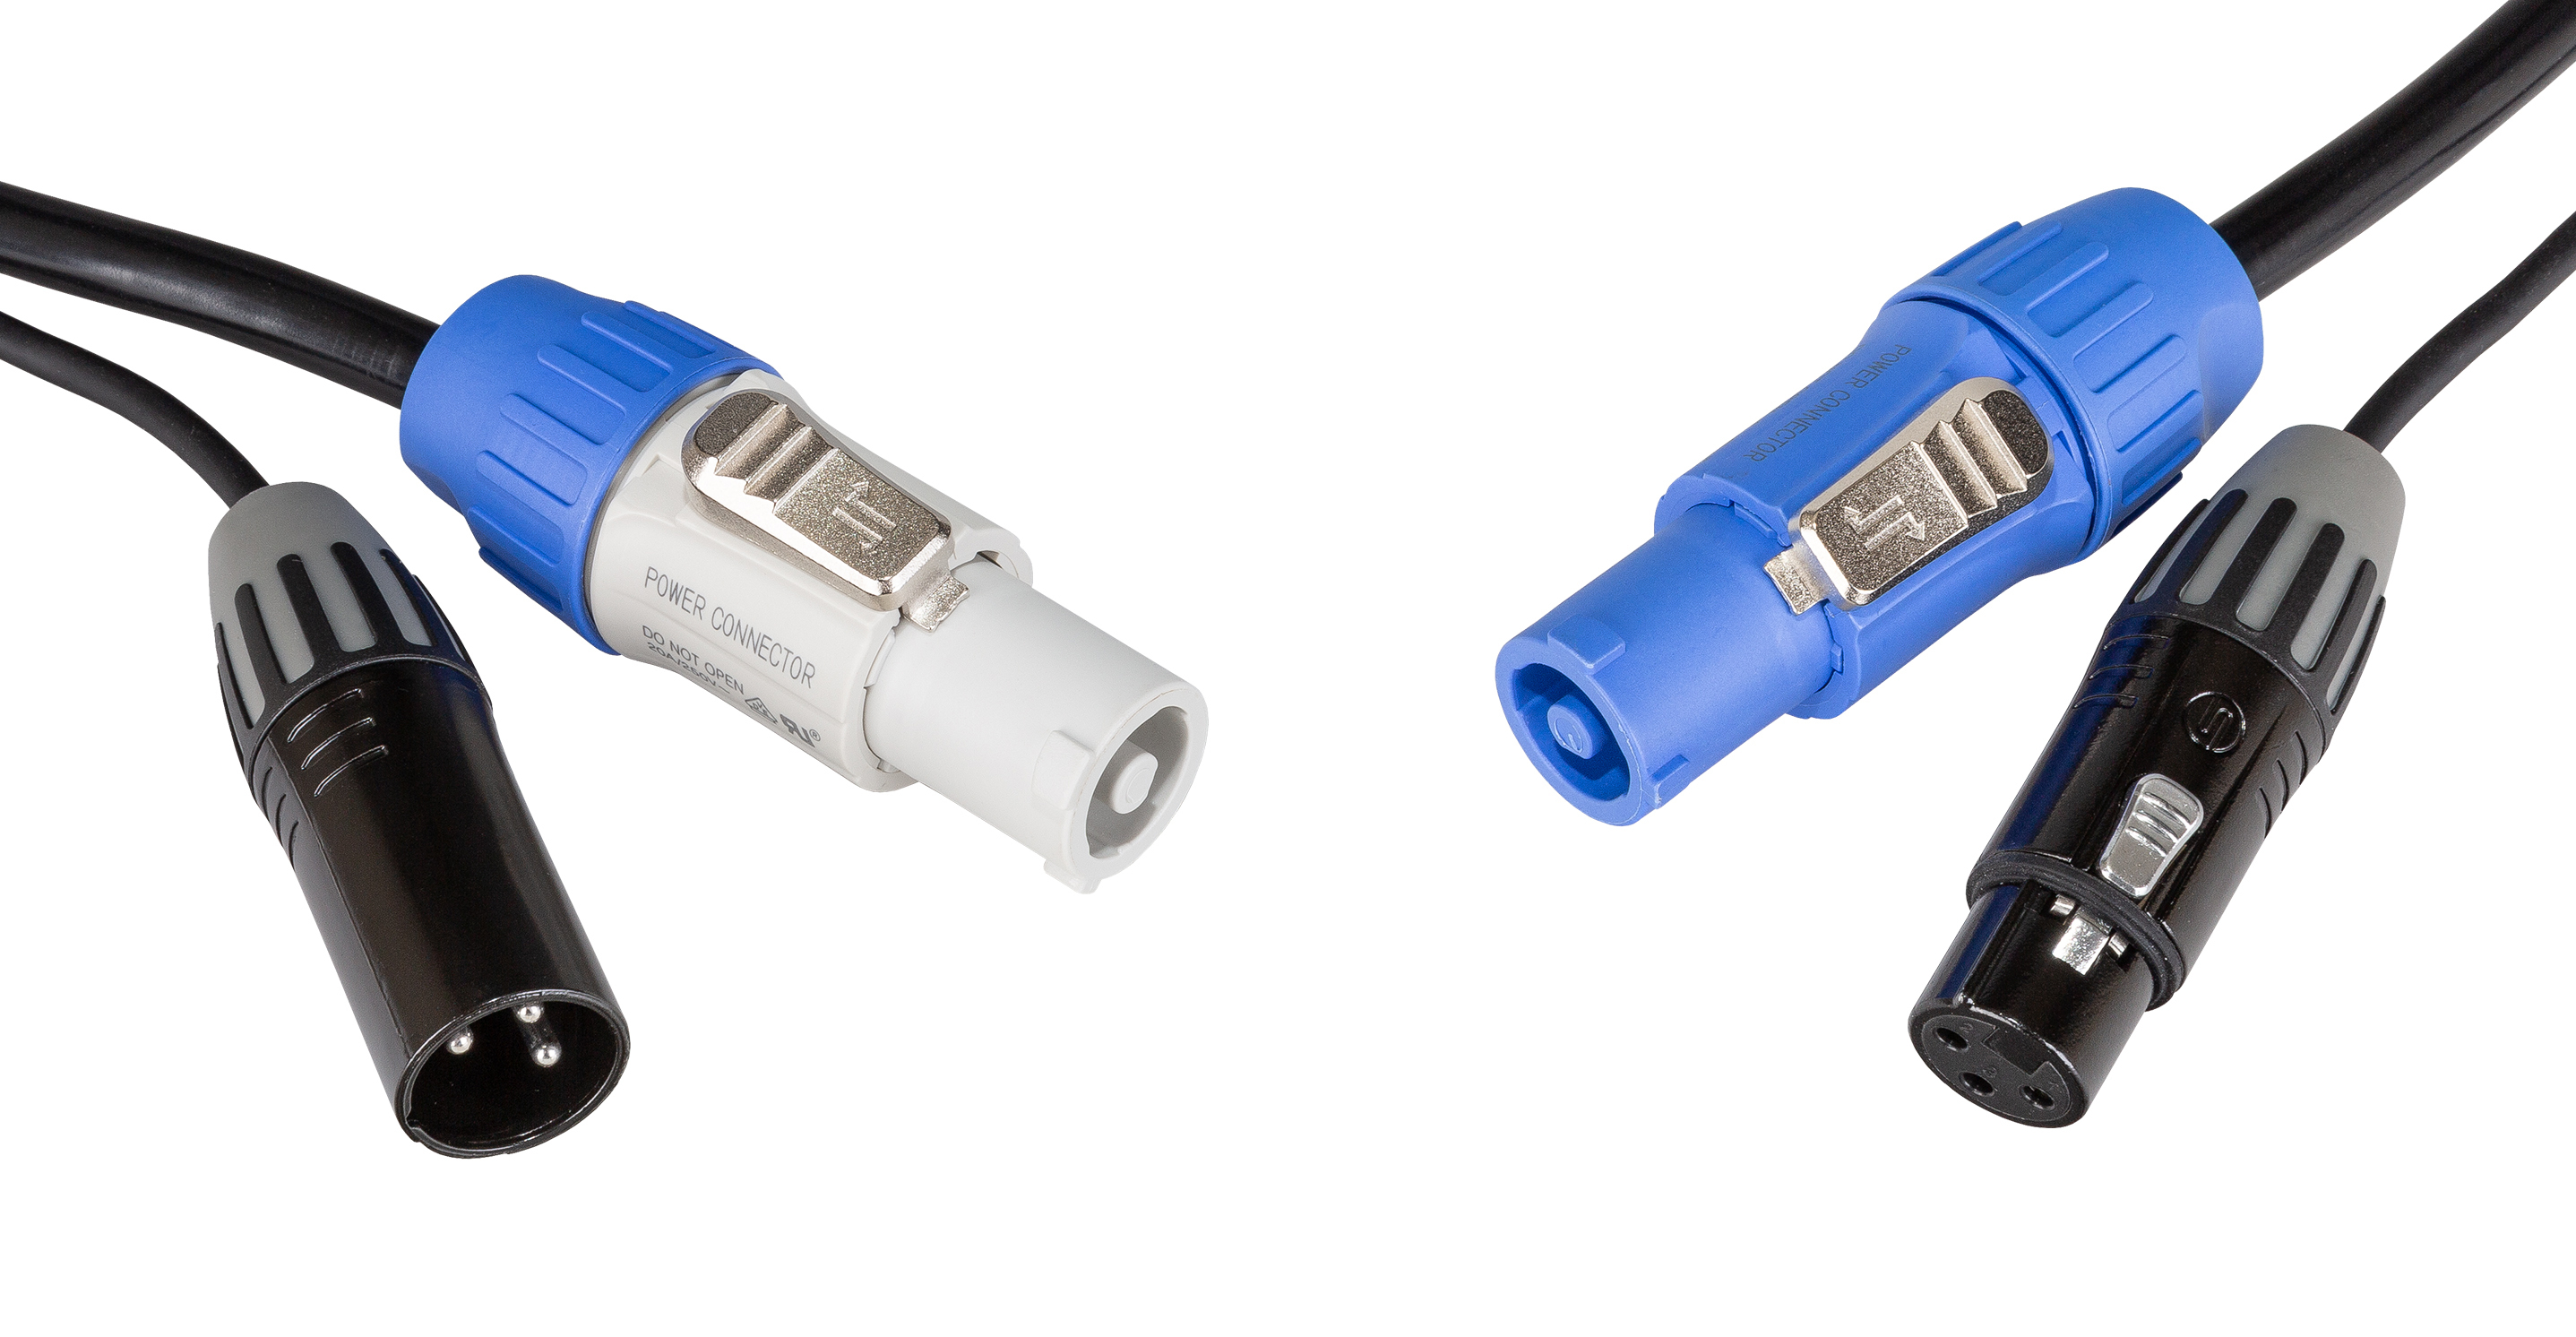 Combi cable with Seetronic XLR 3pin and Powercon compatible connectors, 10m